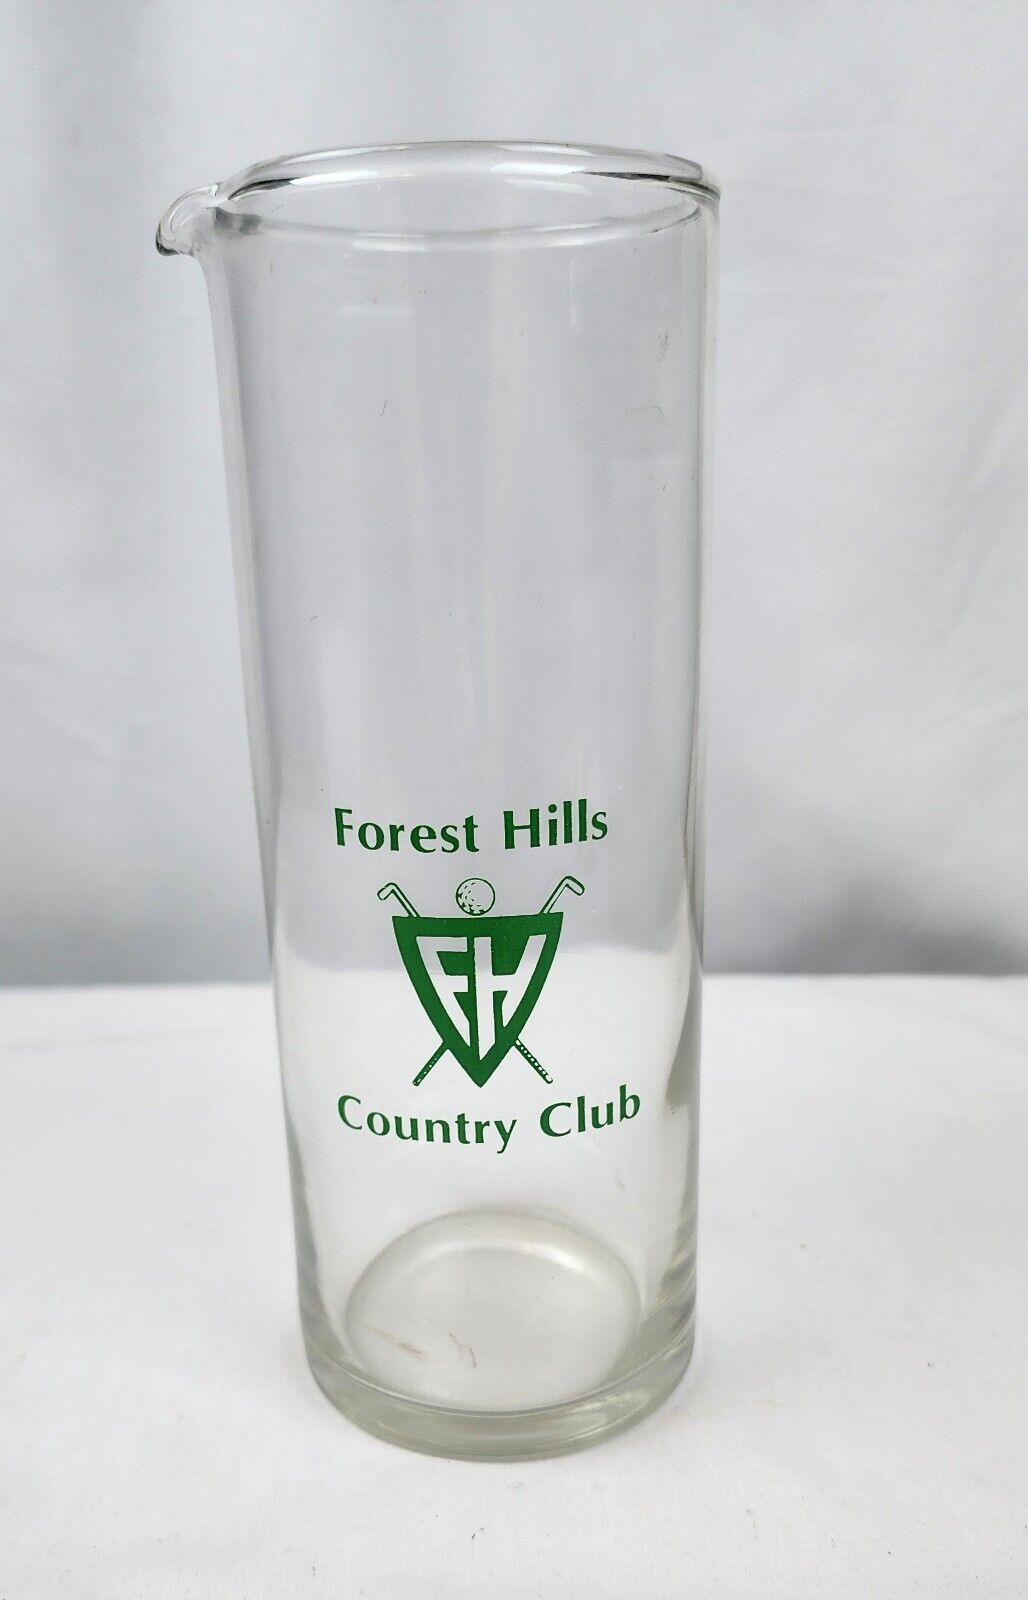 Forest Hills Country Club Drink Mixing Glass Advertising Piece Estate Sale Find 